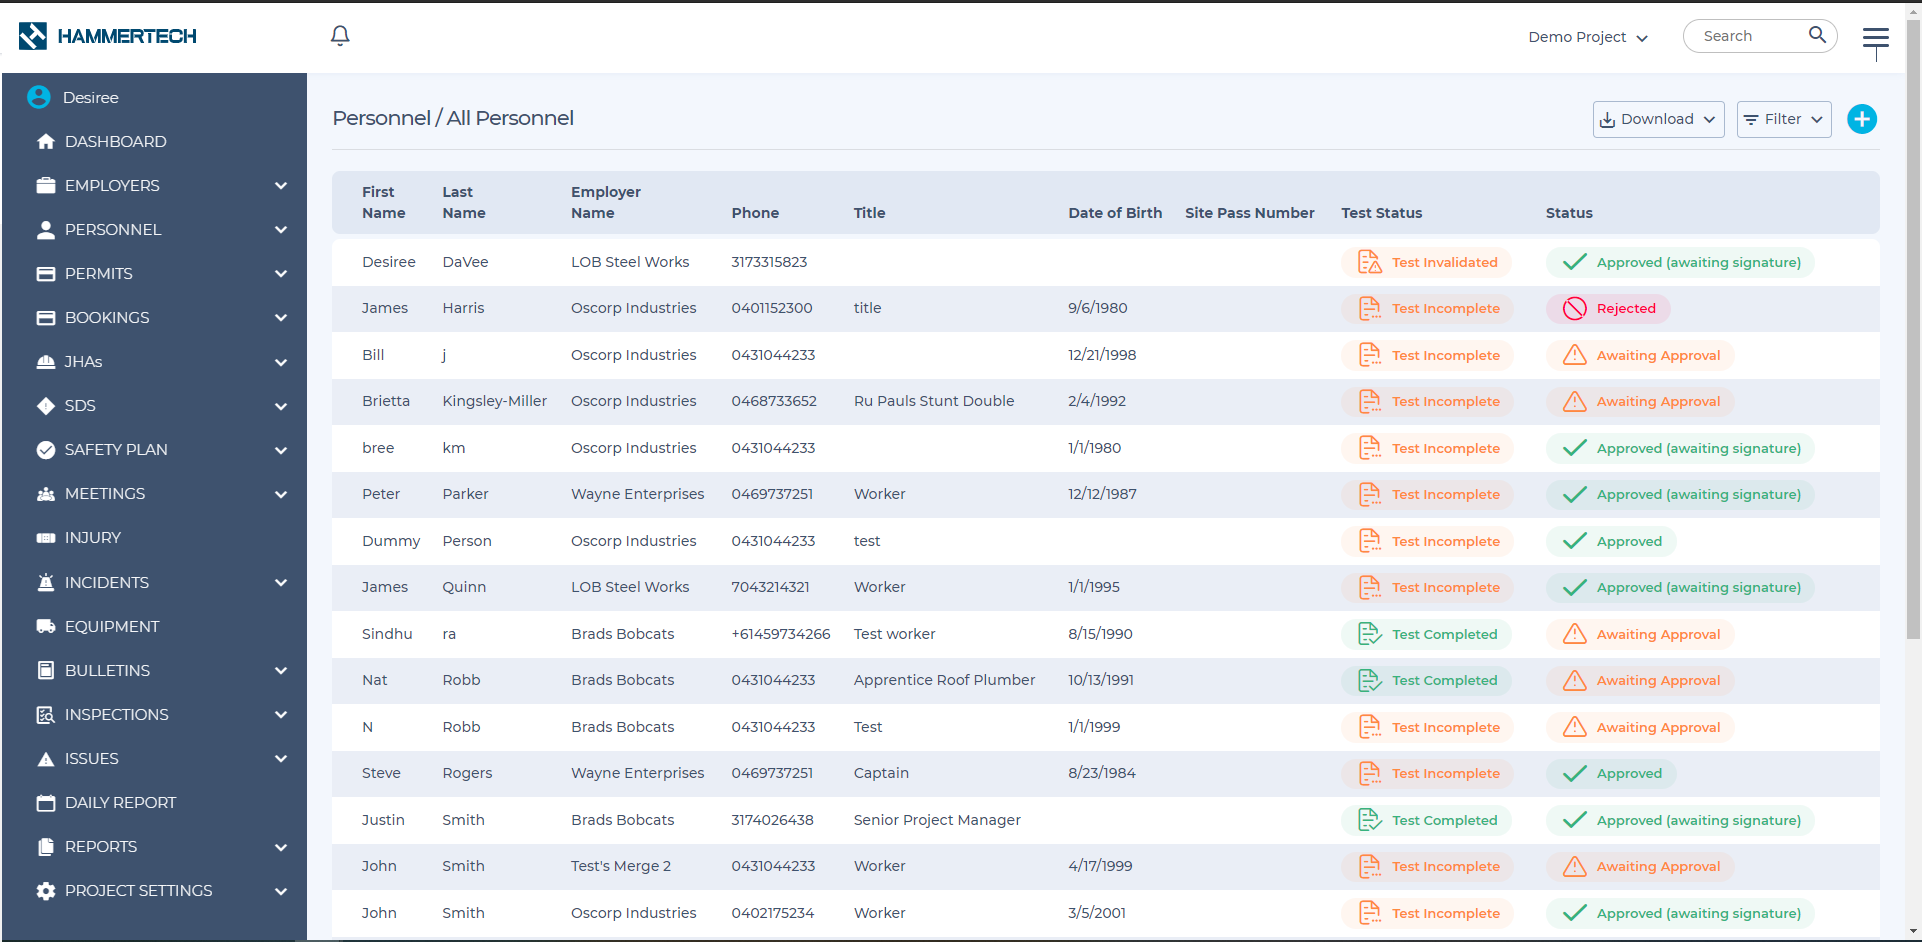 Construction site personnel management tool: Screenshot of HammerTech's Personnel Management module showcasing a real-time roster of workers, their employers, contact details, roles, test statuses and overall authorizations - a vital tool for ensuring safety and compliance in construction.